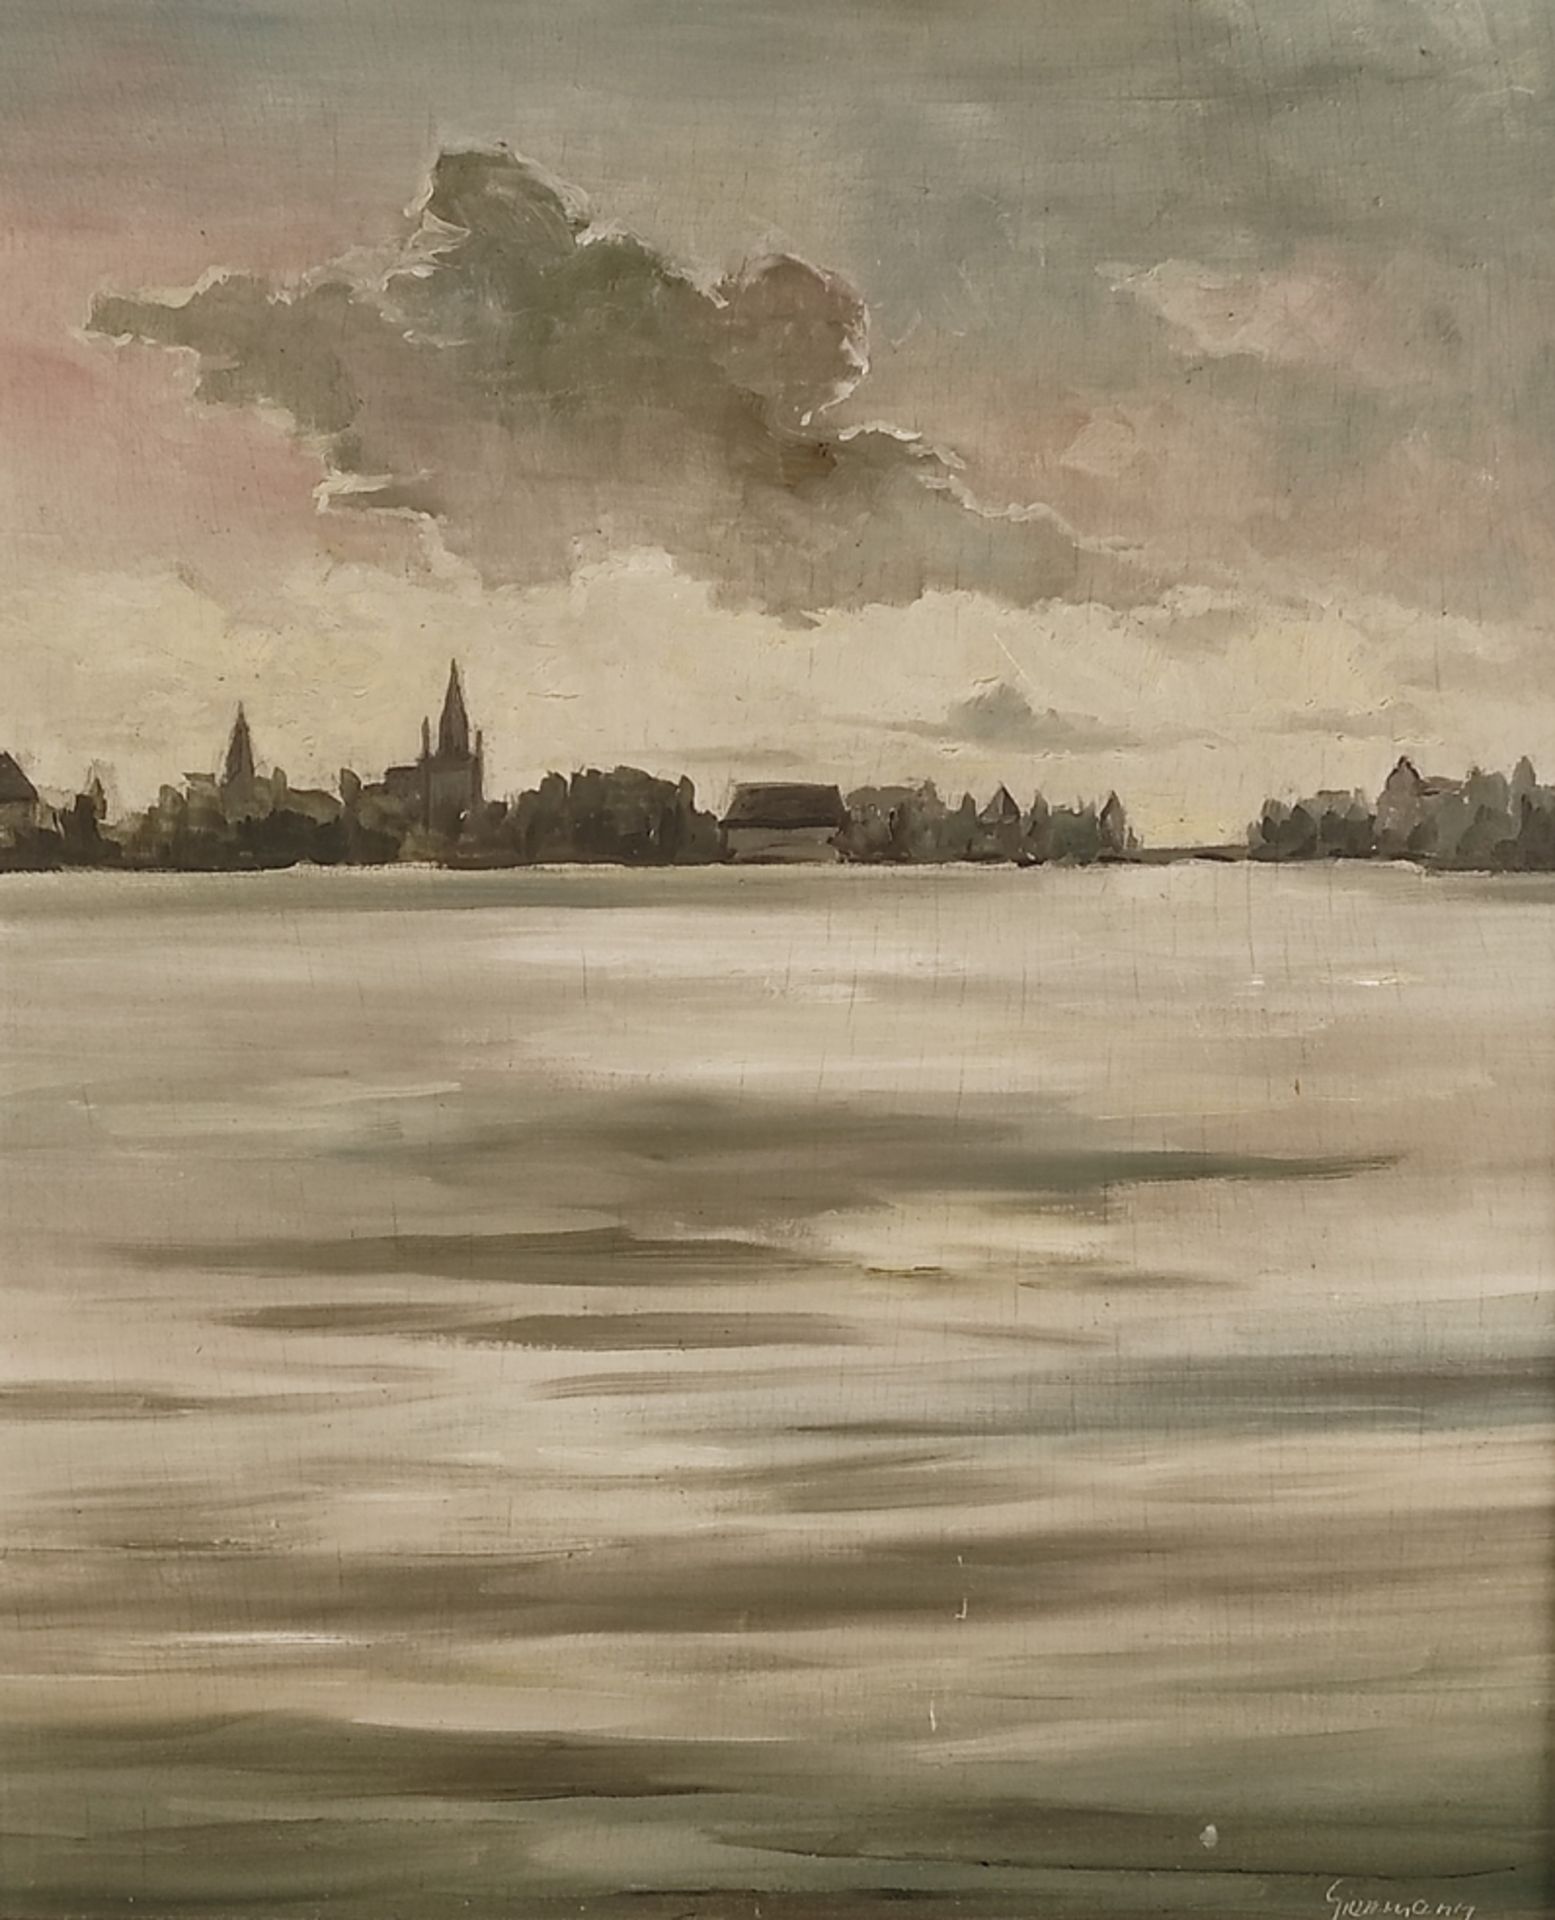 Constance artist (20th century) "View of Constance", with view of cathedral and bridge over the Rhi